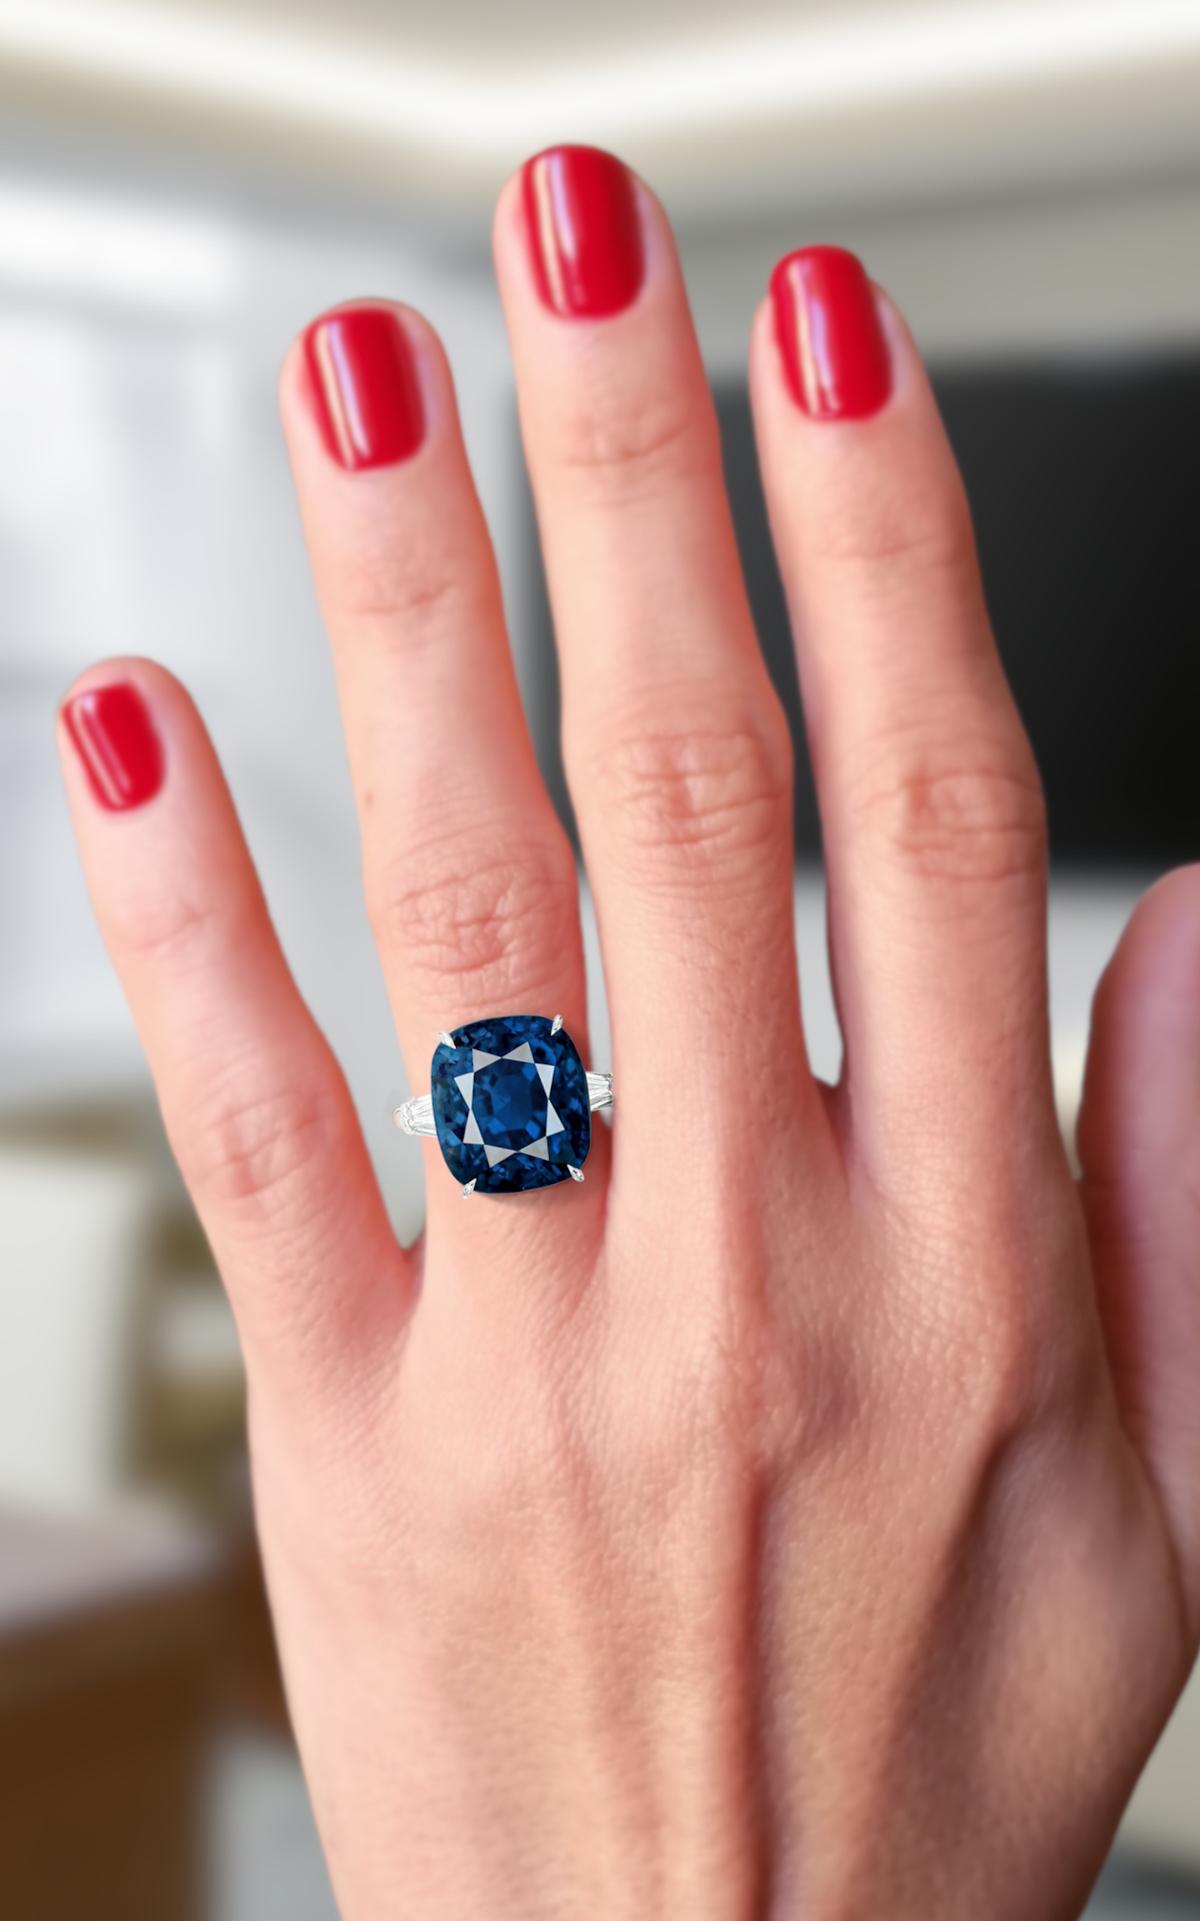 Presenting a rare marvel of nature: the Kashmir Sapphire, a gemstone of unparalleled beauty and rarity.

Characterized by its intense, velvety blue hue reminiscent of the legendary Kashmir mines, this 7.73 carat square cushion-cut sapphire is a true